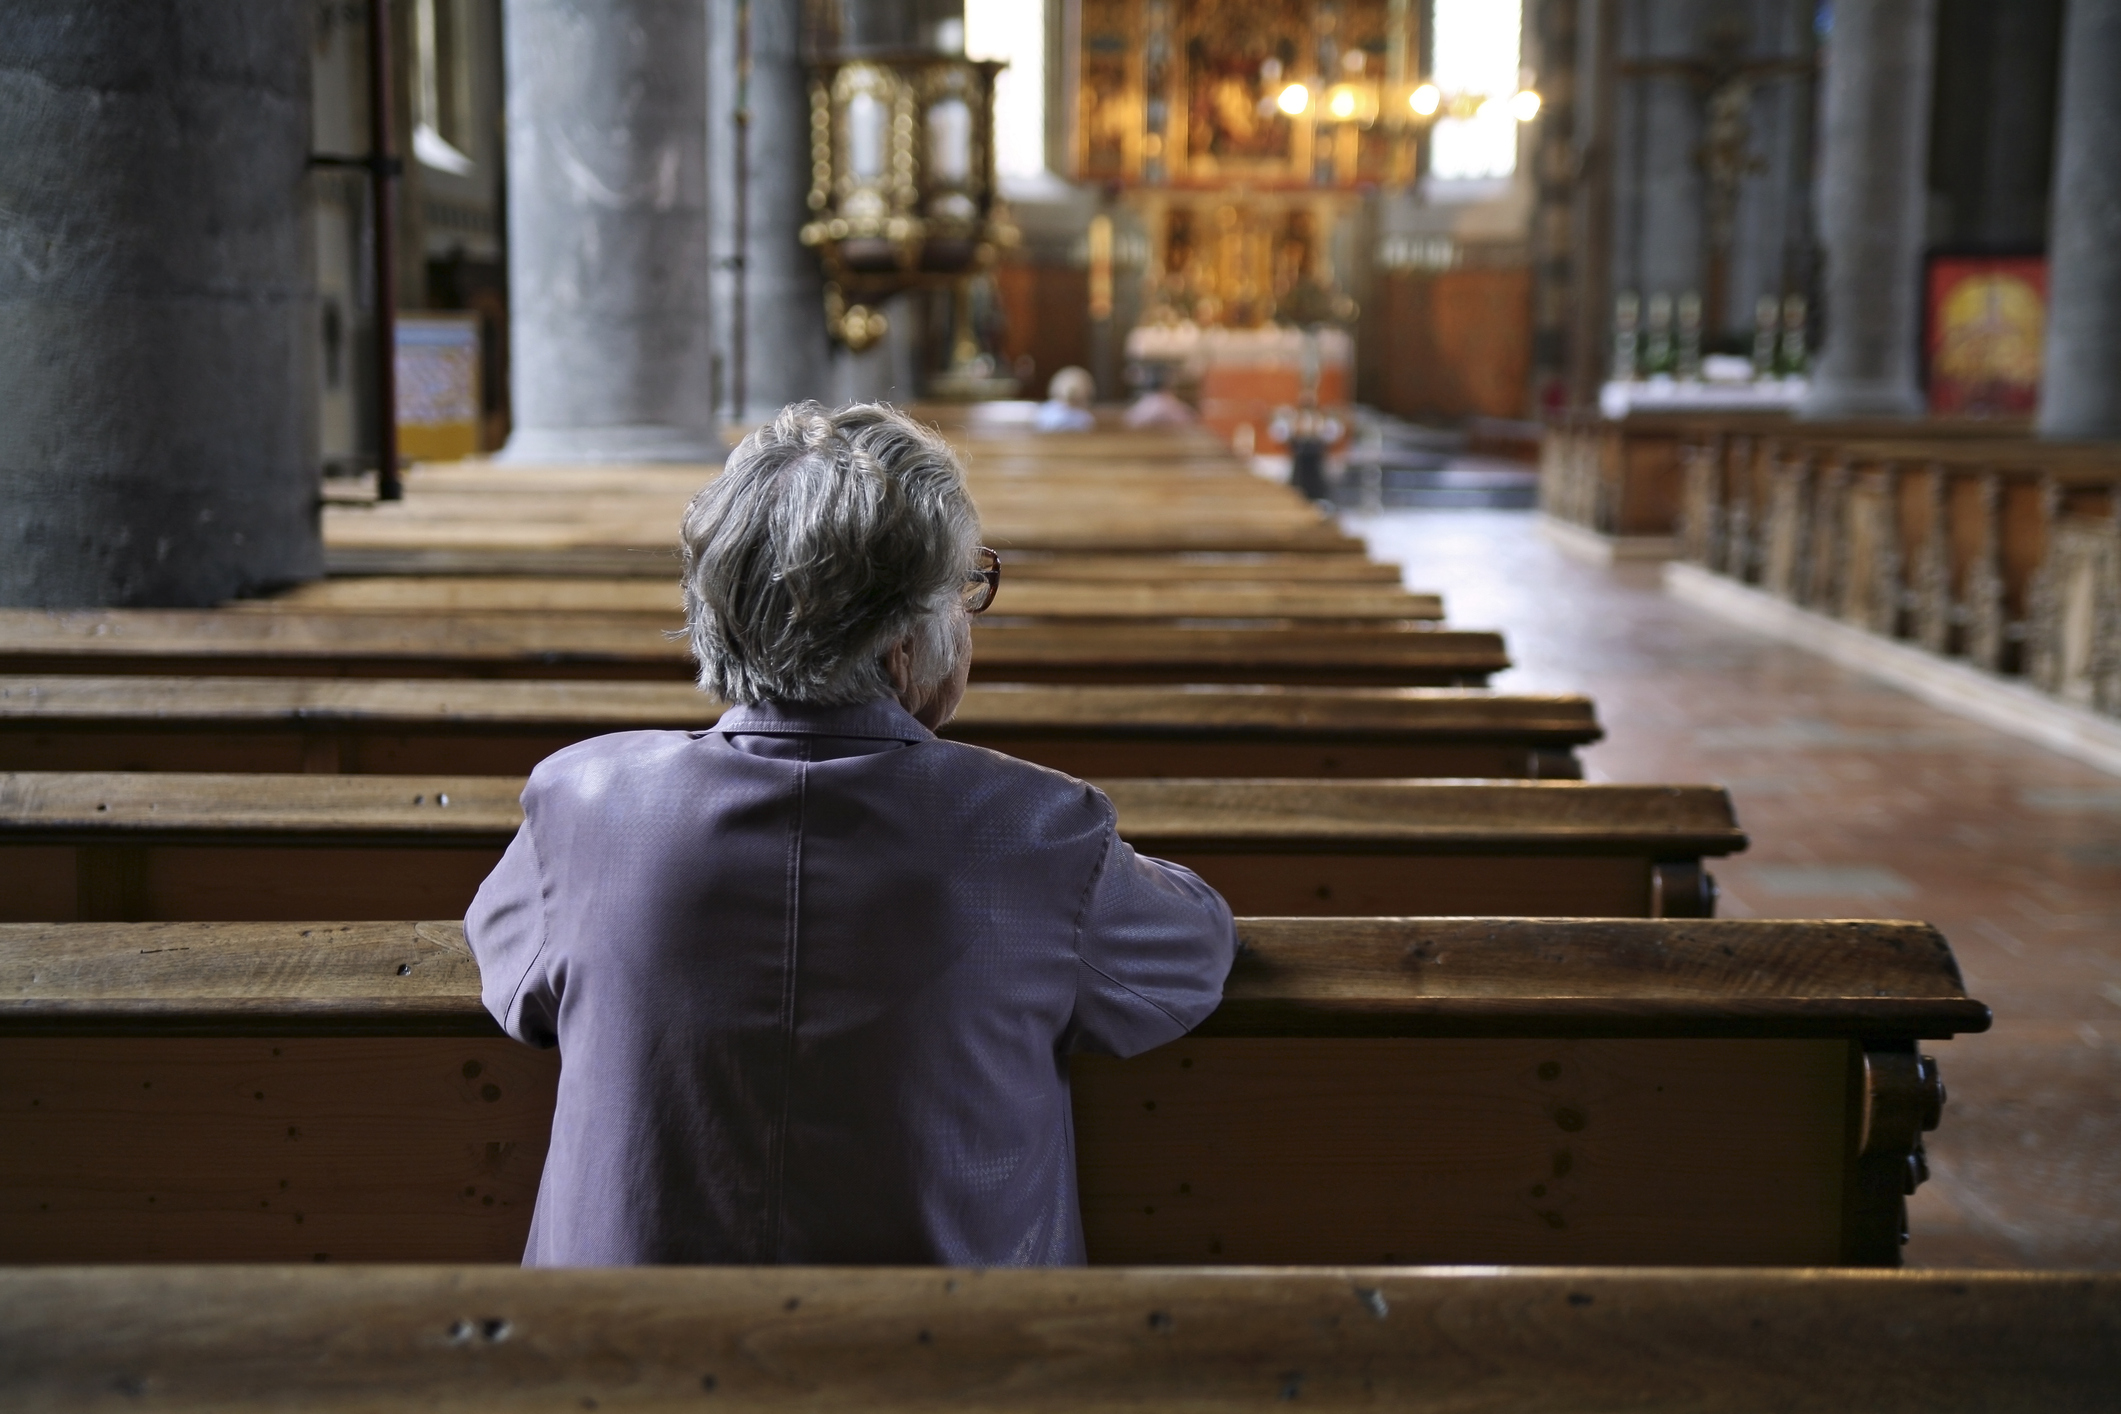 Older woman praying in an almost empty church, rear view